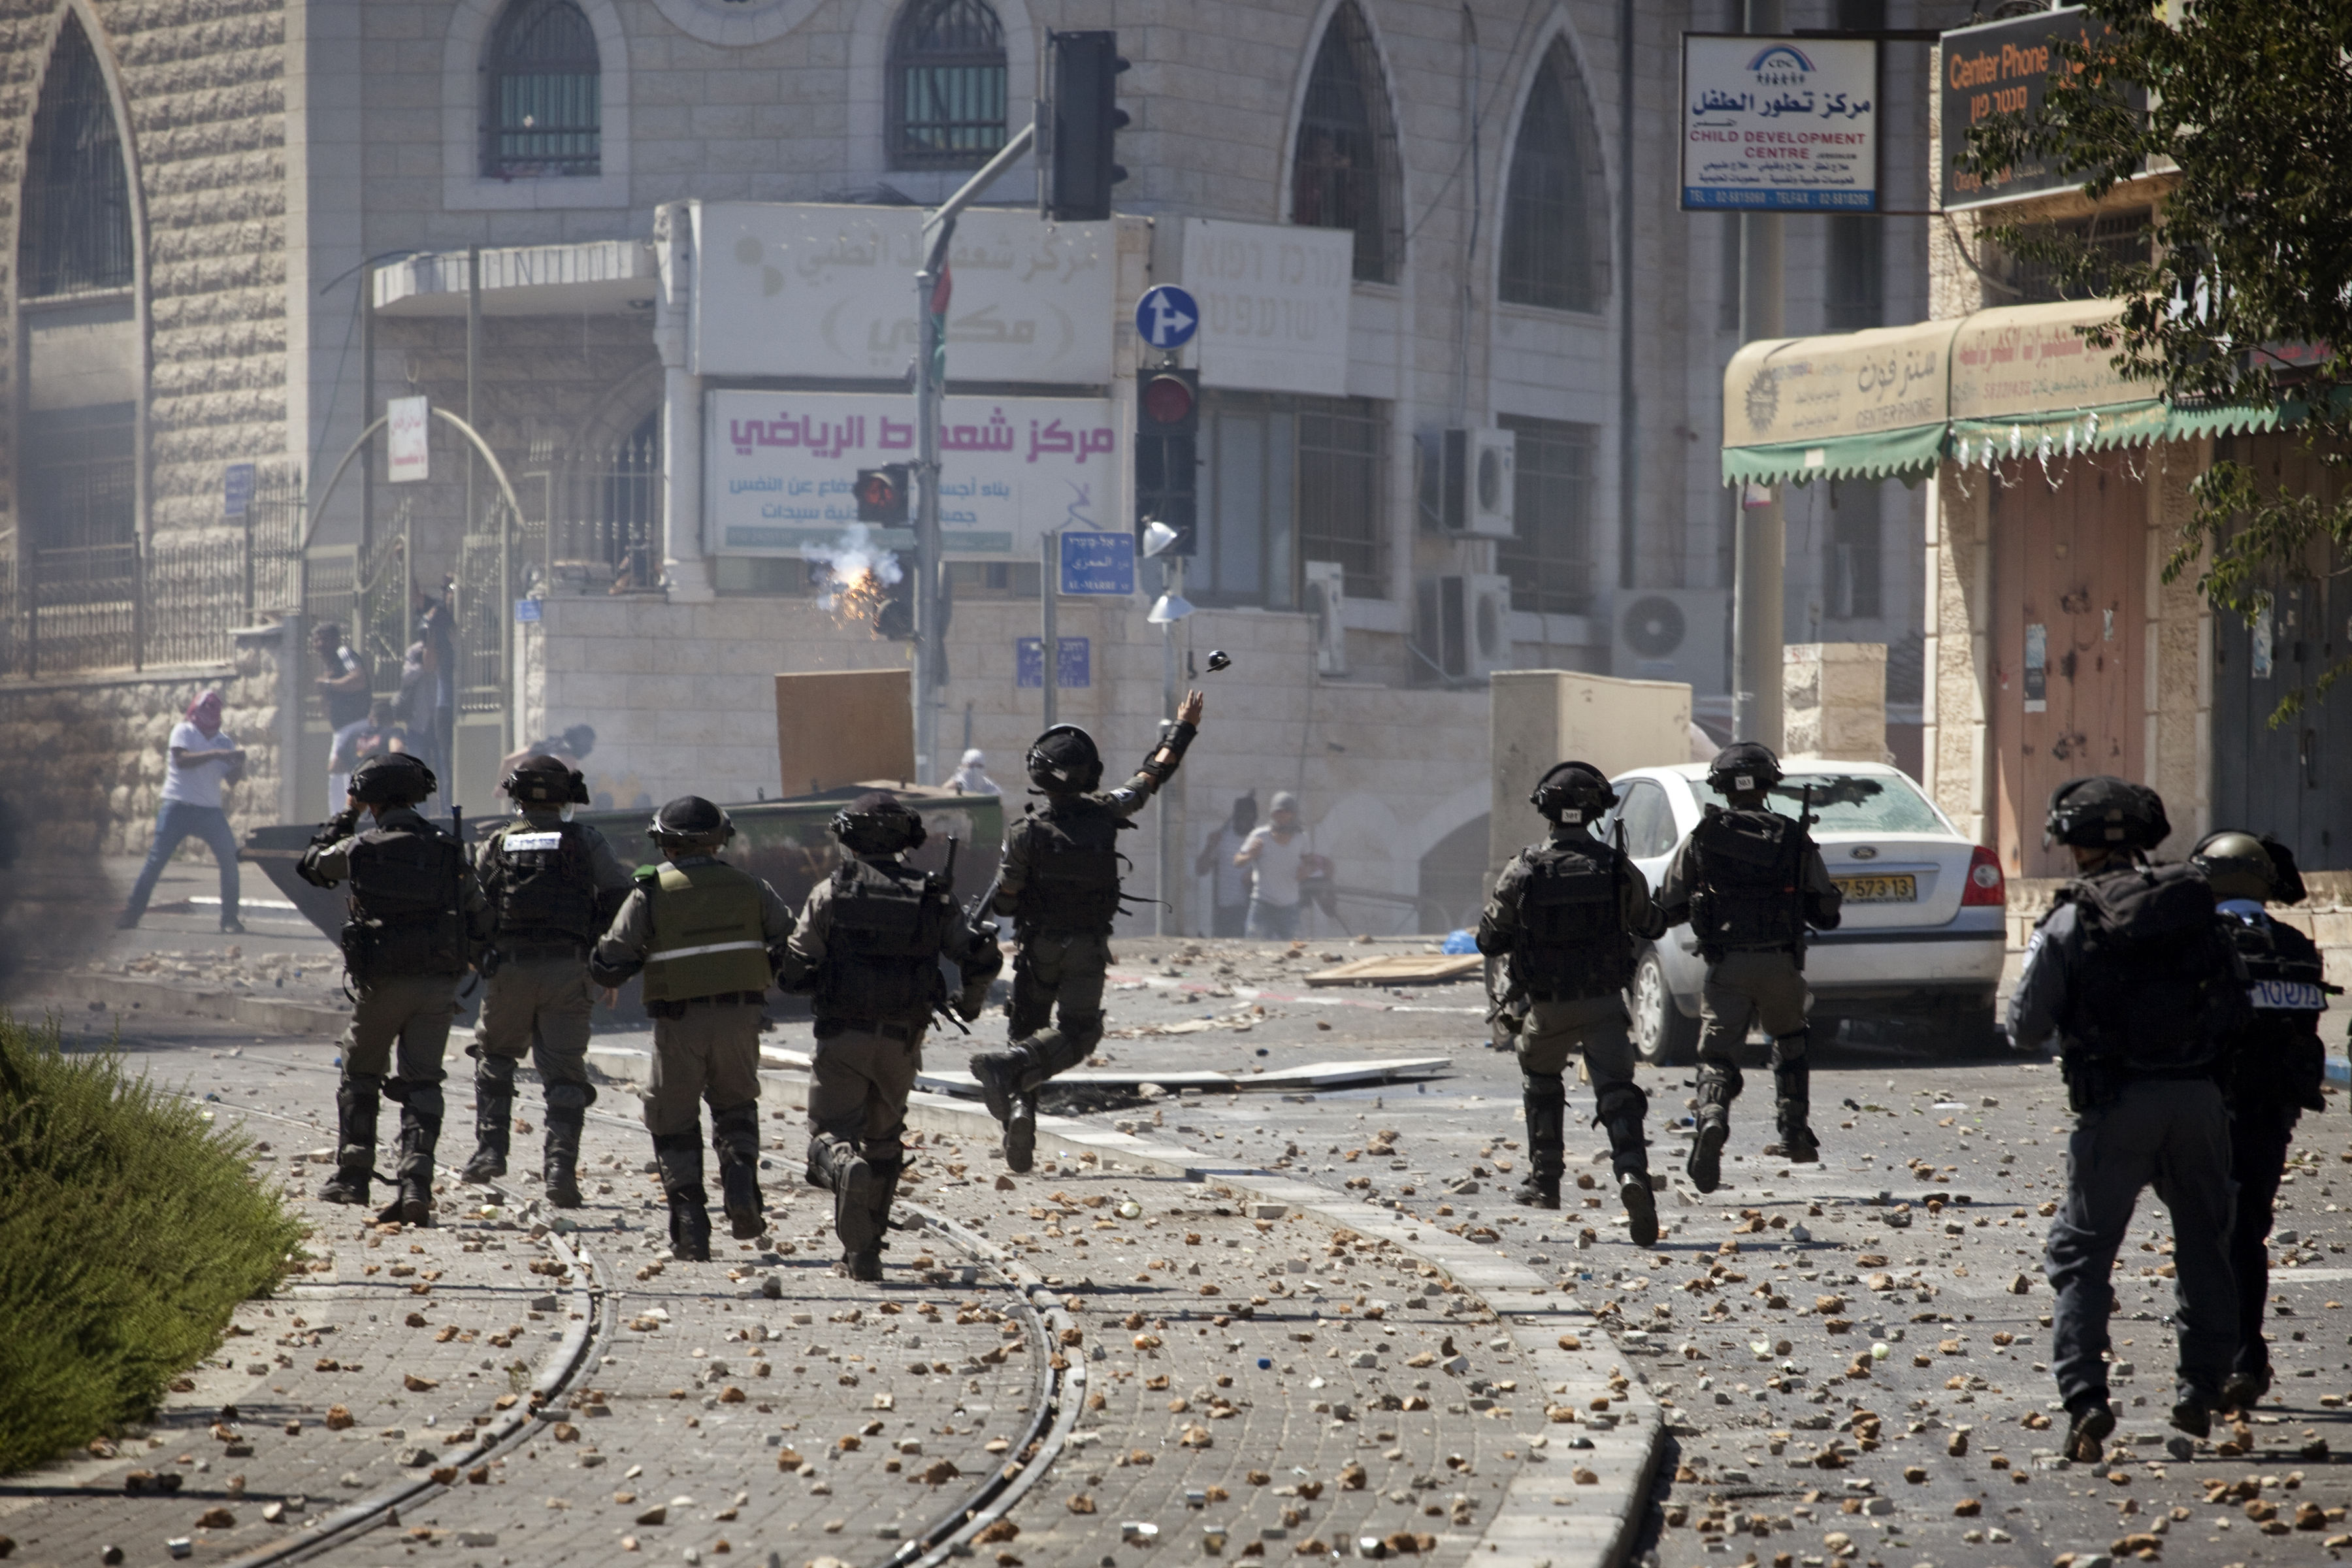 An Israeli soldier throws a grenade during clashes with